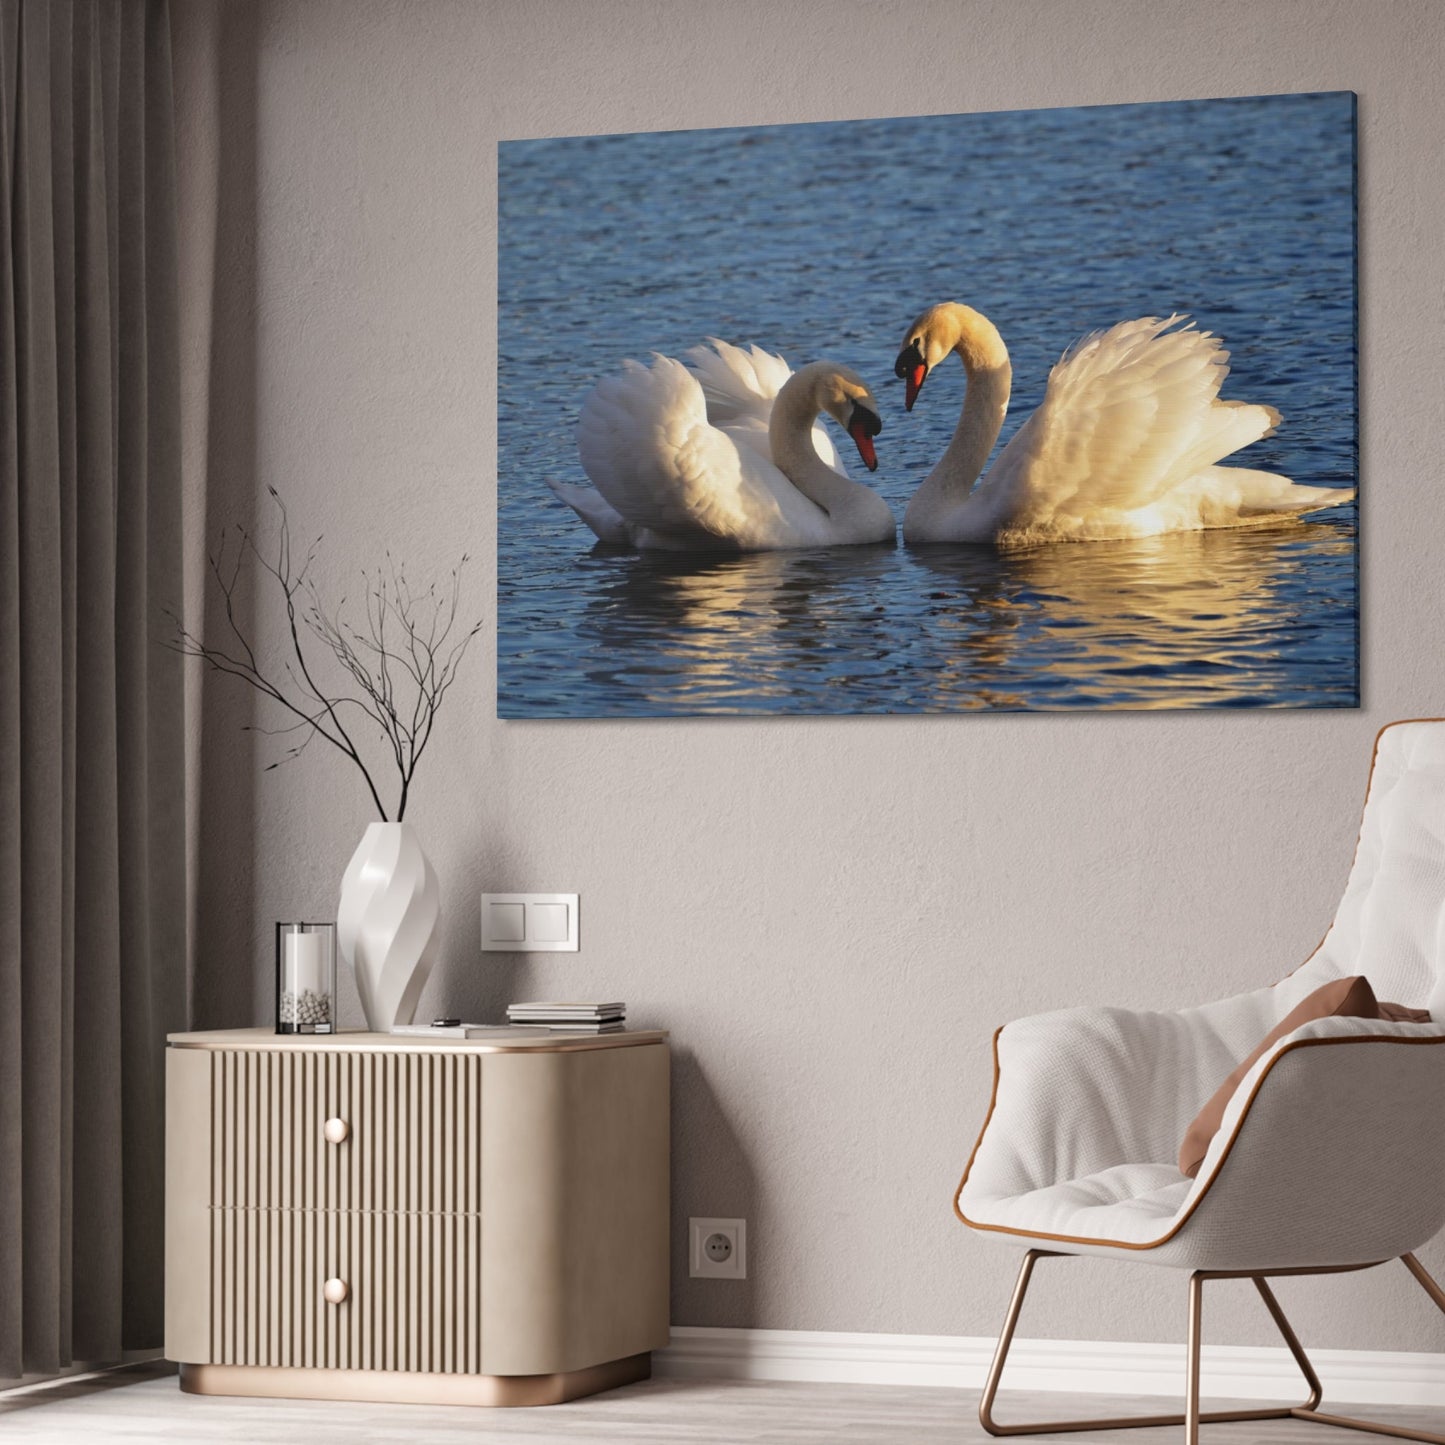 Majestic Beauty: Canvas Wall Art Displaying the Grace and Strength of Swans